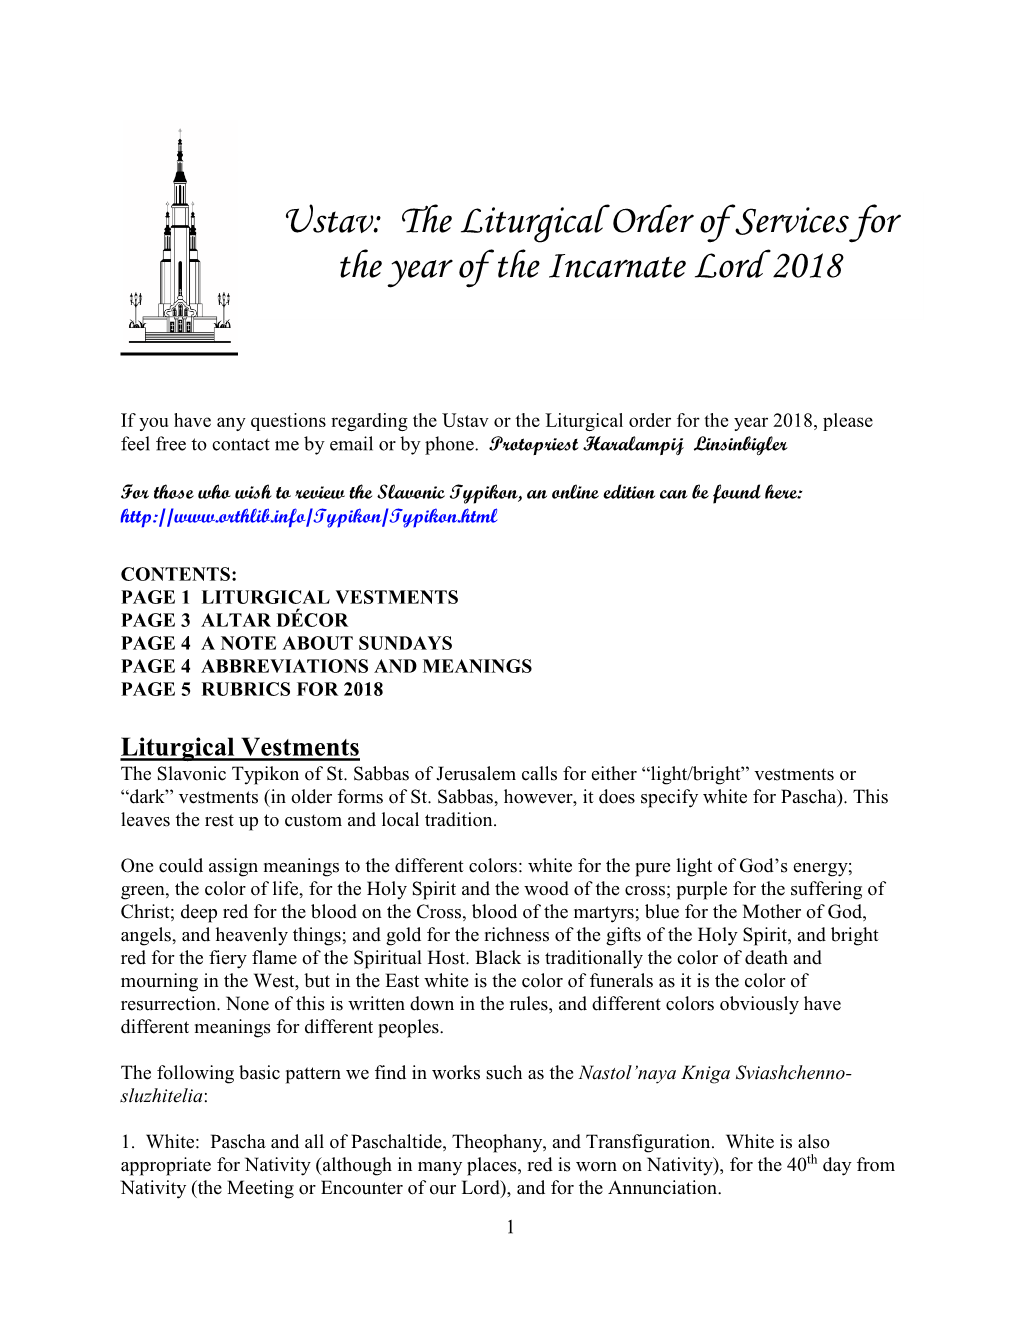 Ustav: the Liturgical Order of Services for the Year of the Incarnate Lord 2018